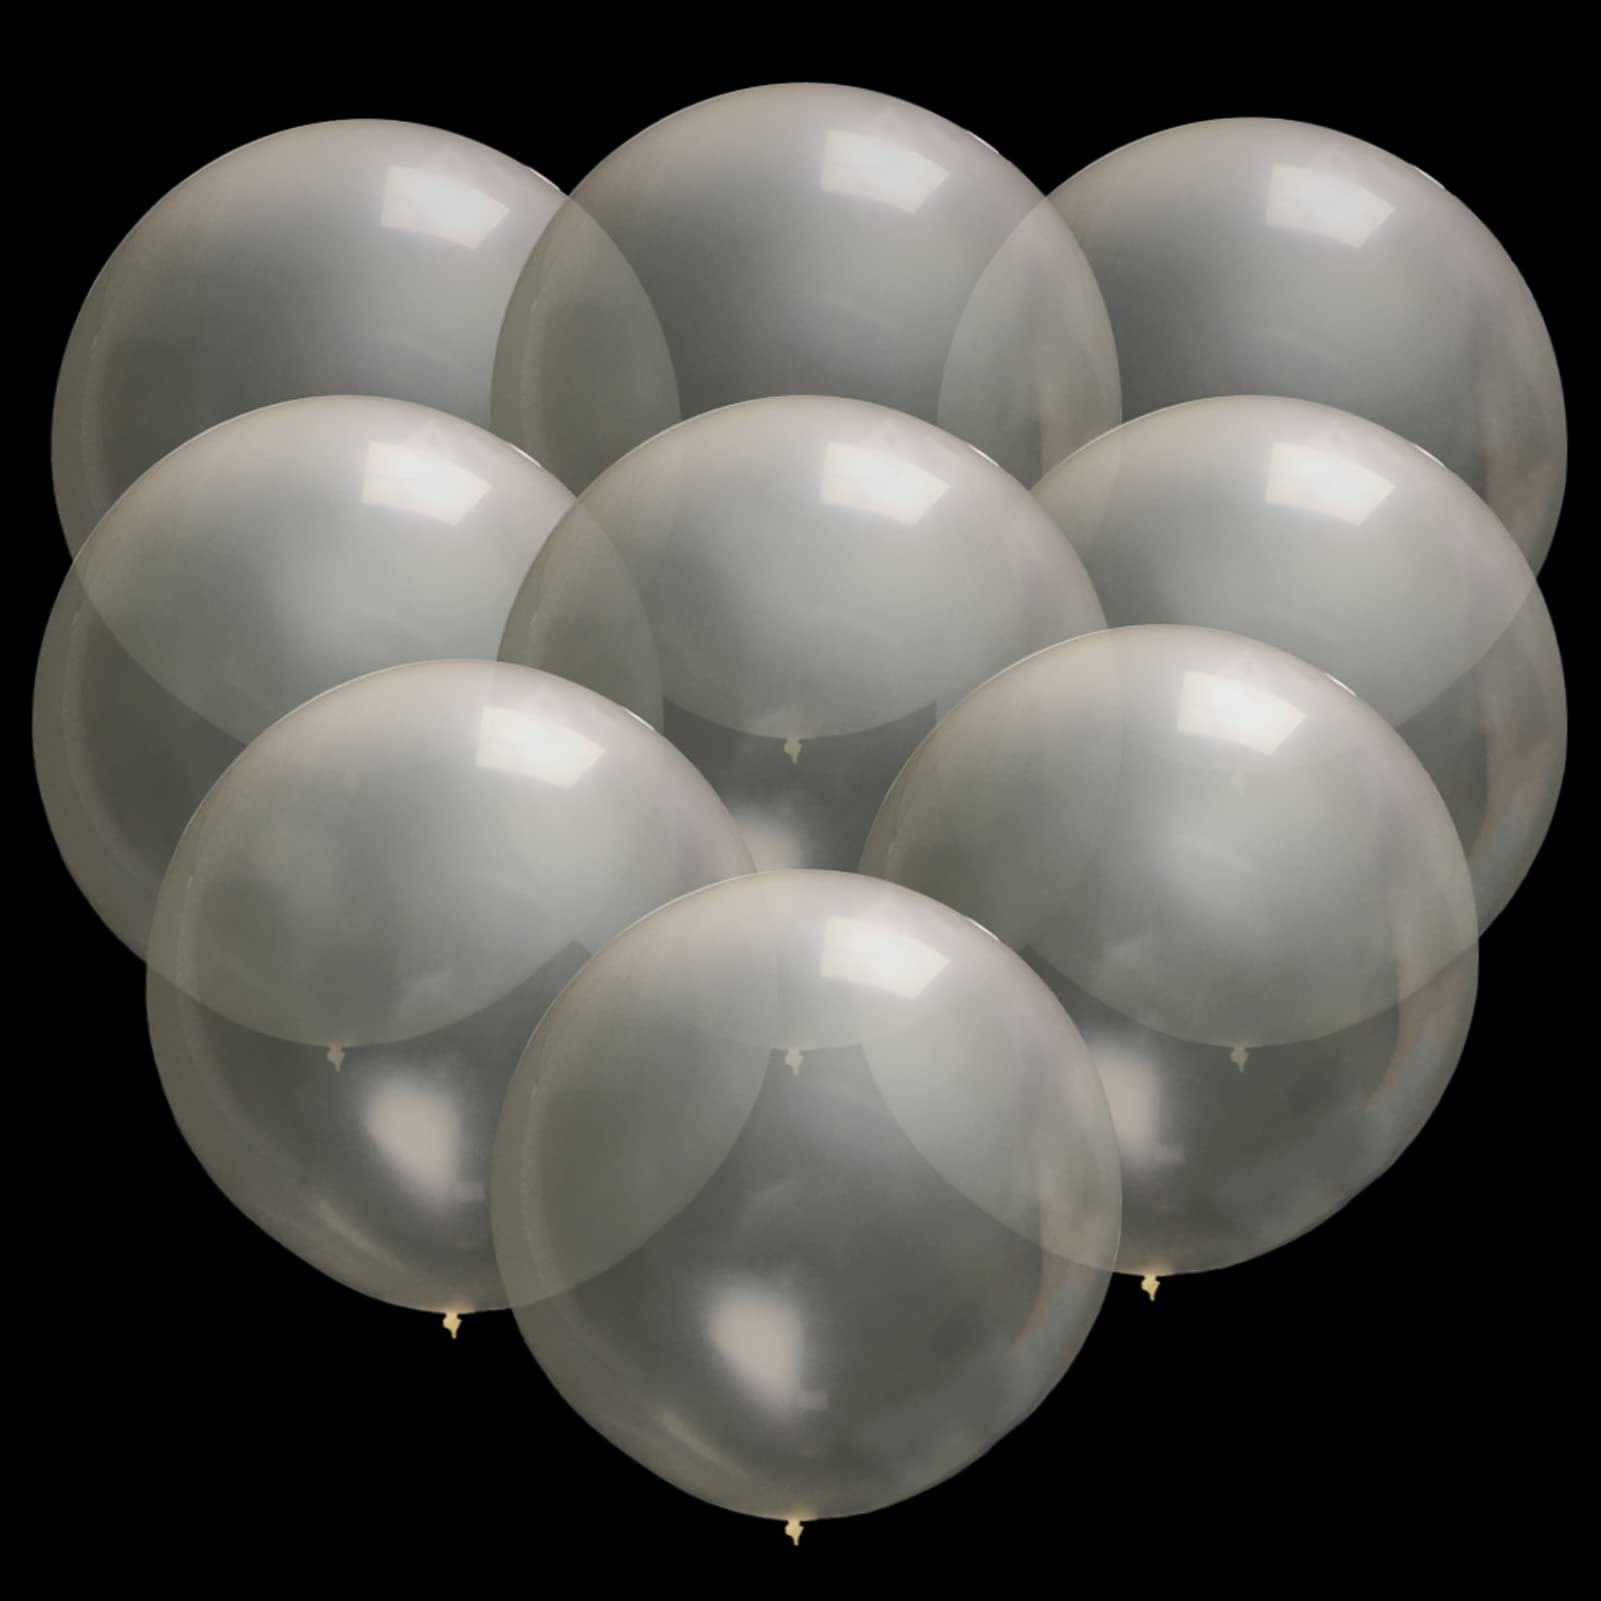 Book Cover 30pcs Clear Balloons 18 Inch Big Clear Balloons Latex Giant Clear Balloon Jumbo Thick Balloons for Photo Shoot Birthday Wedding Party Festival Decorations